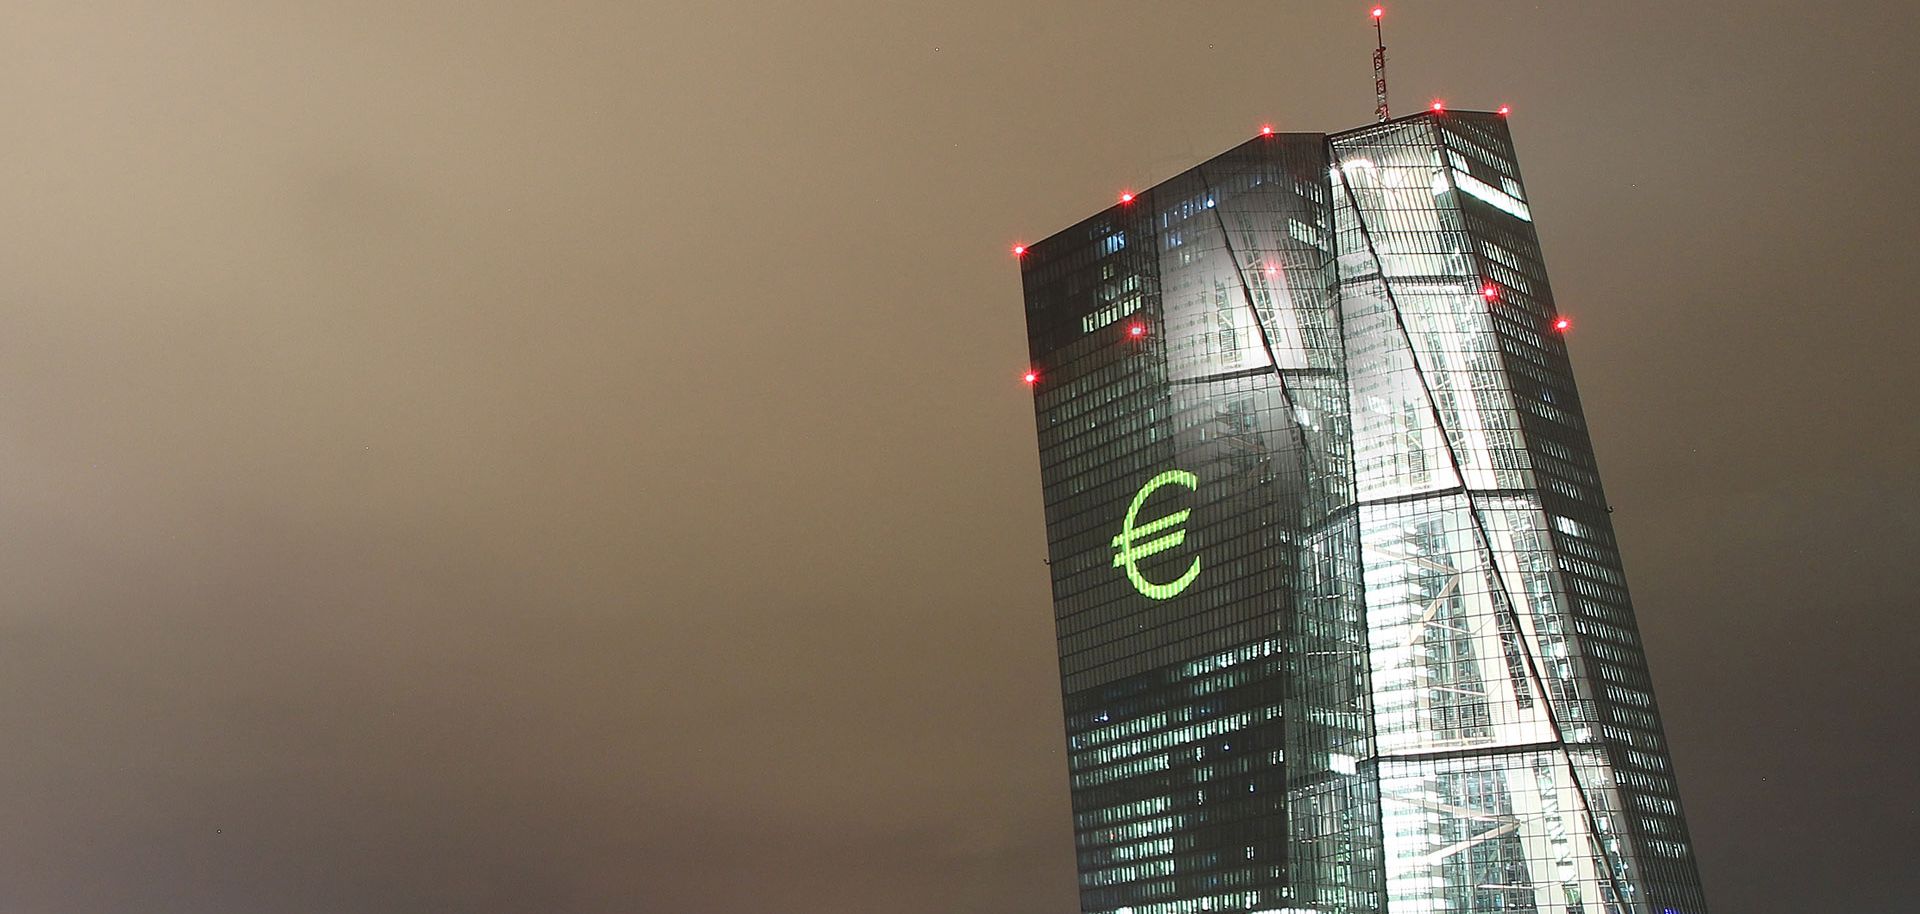 The main building of the European Central Bank in Frankfurt. The bank's monetary policy has been good for Southern Europe but not for the European Union's largest member, Germany.